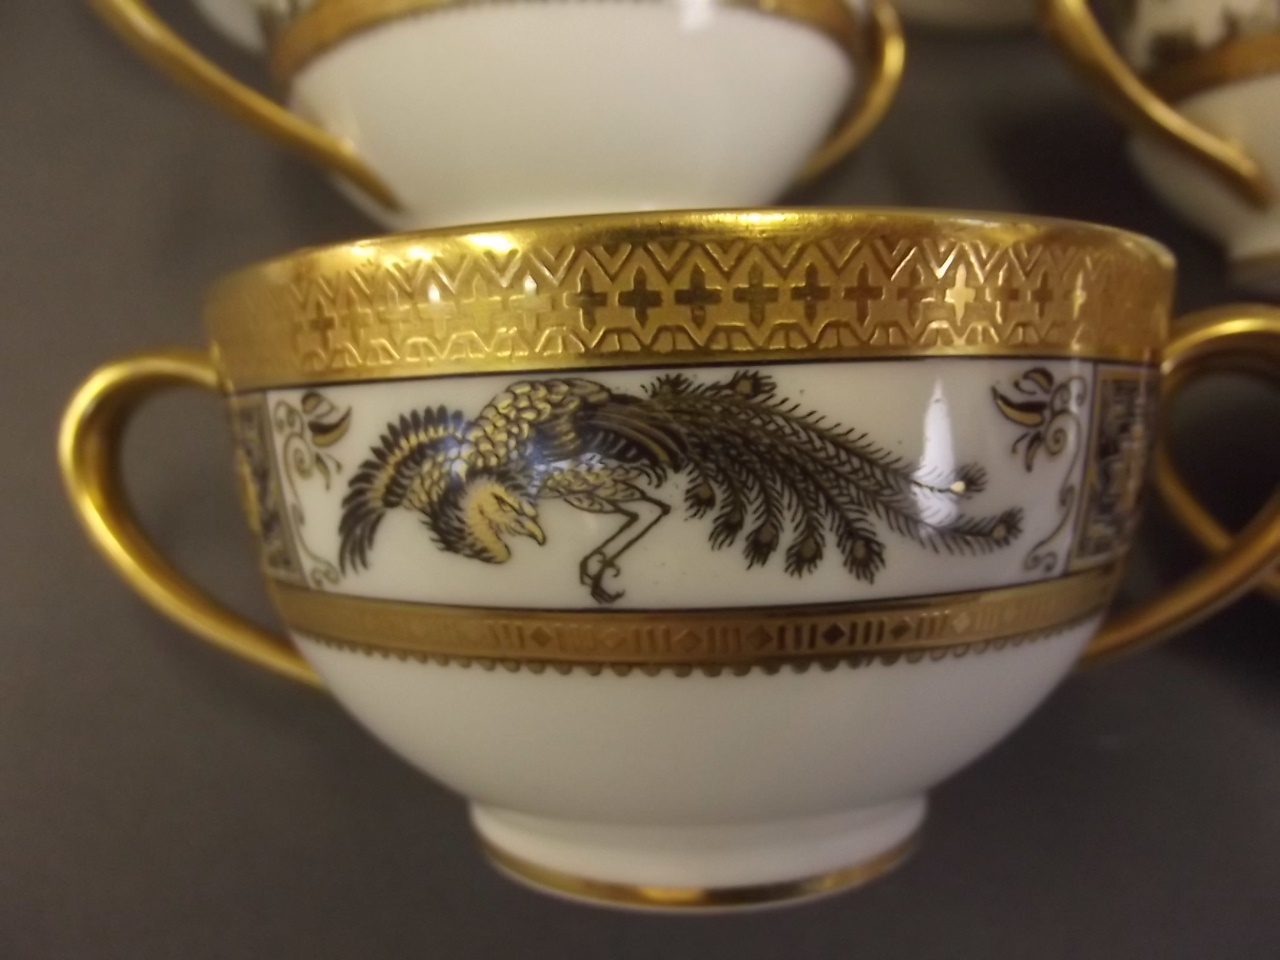 A set of 6 Limoges porcelain twin handled cups decorated in black and gilt with exotic birds - Image 2 of 3